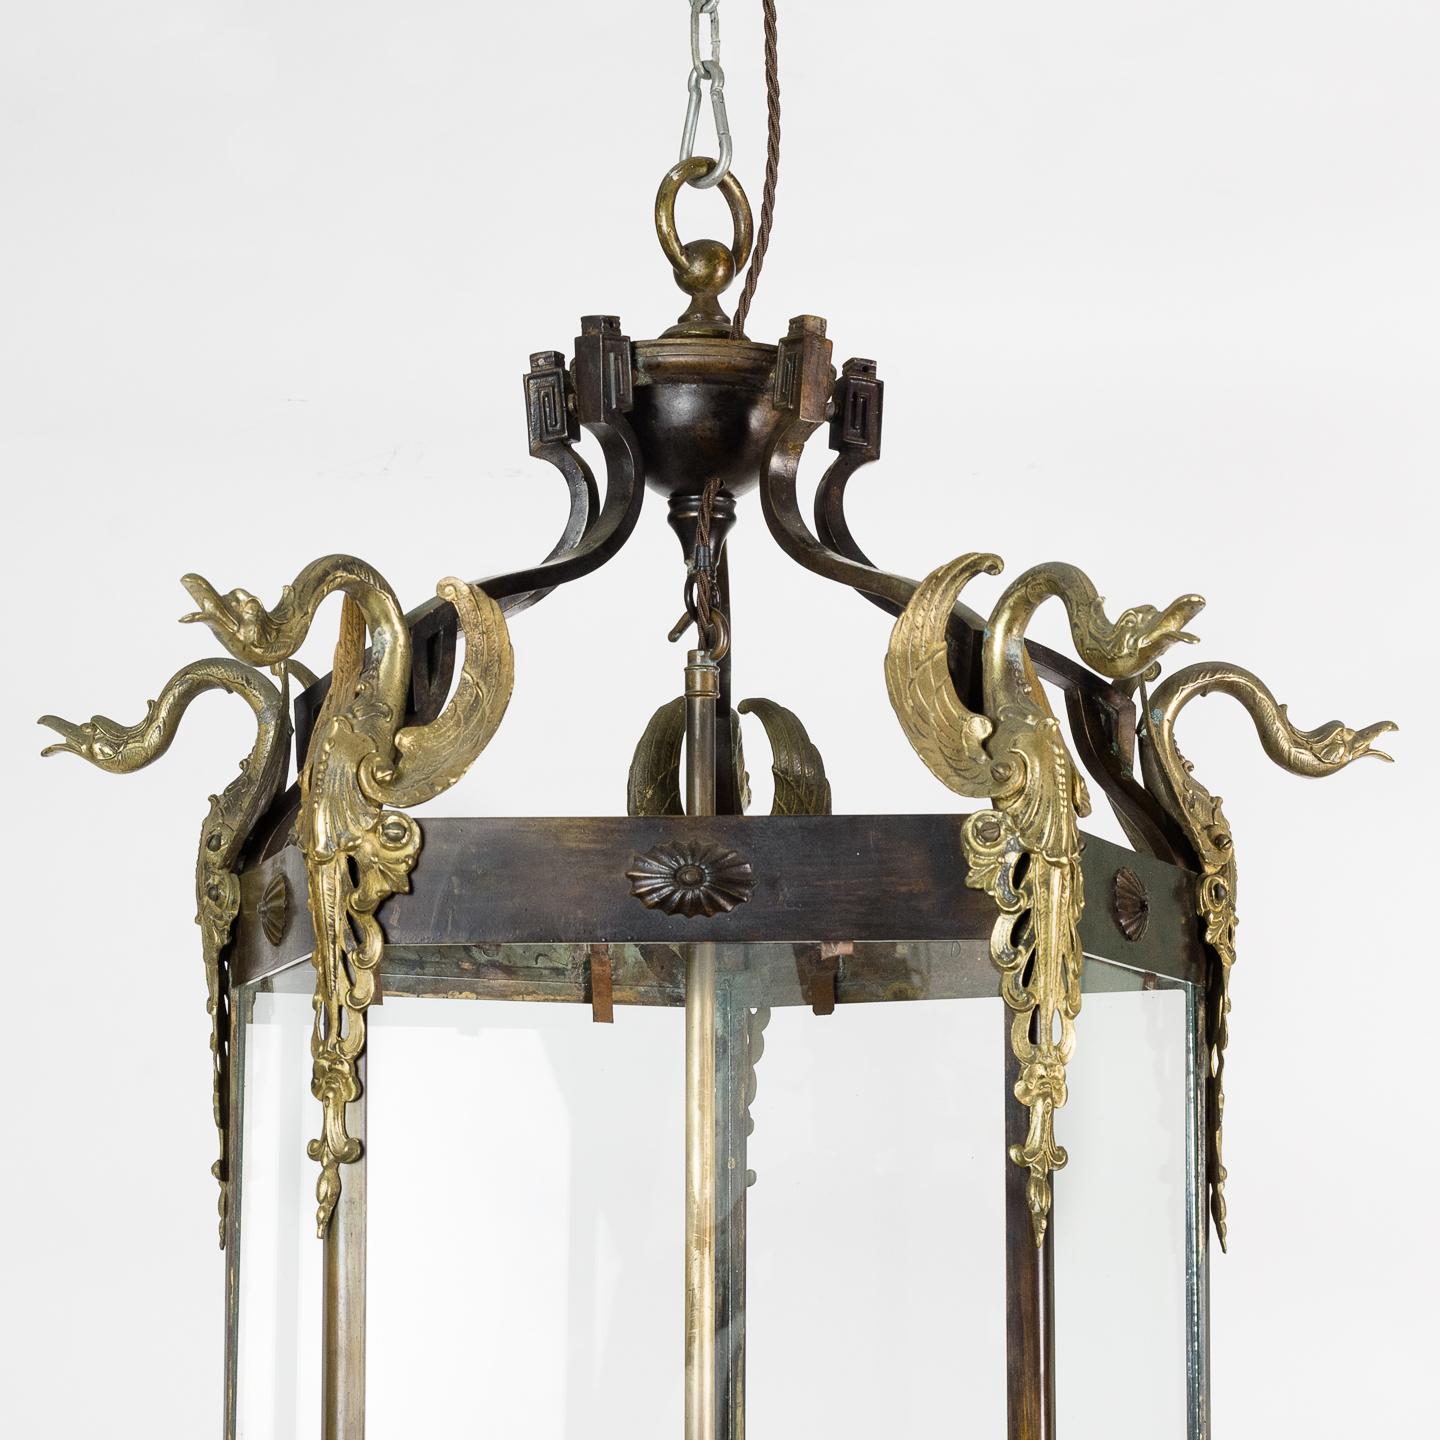 19th Century French Empire Style Hall Lantern In Good Condition For Sale In London, GB